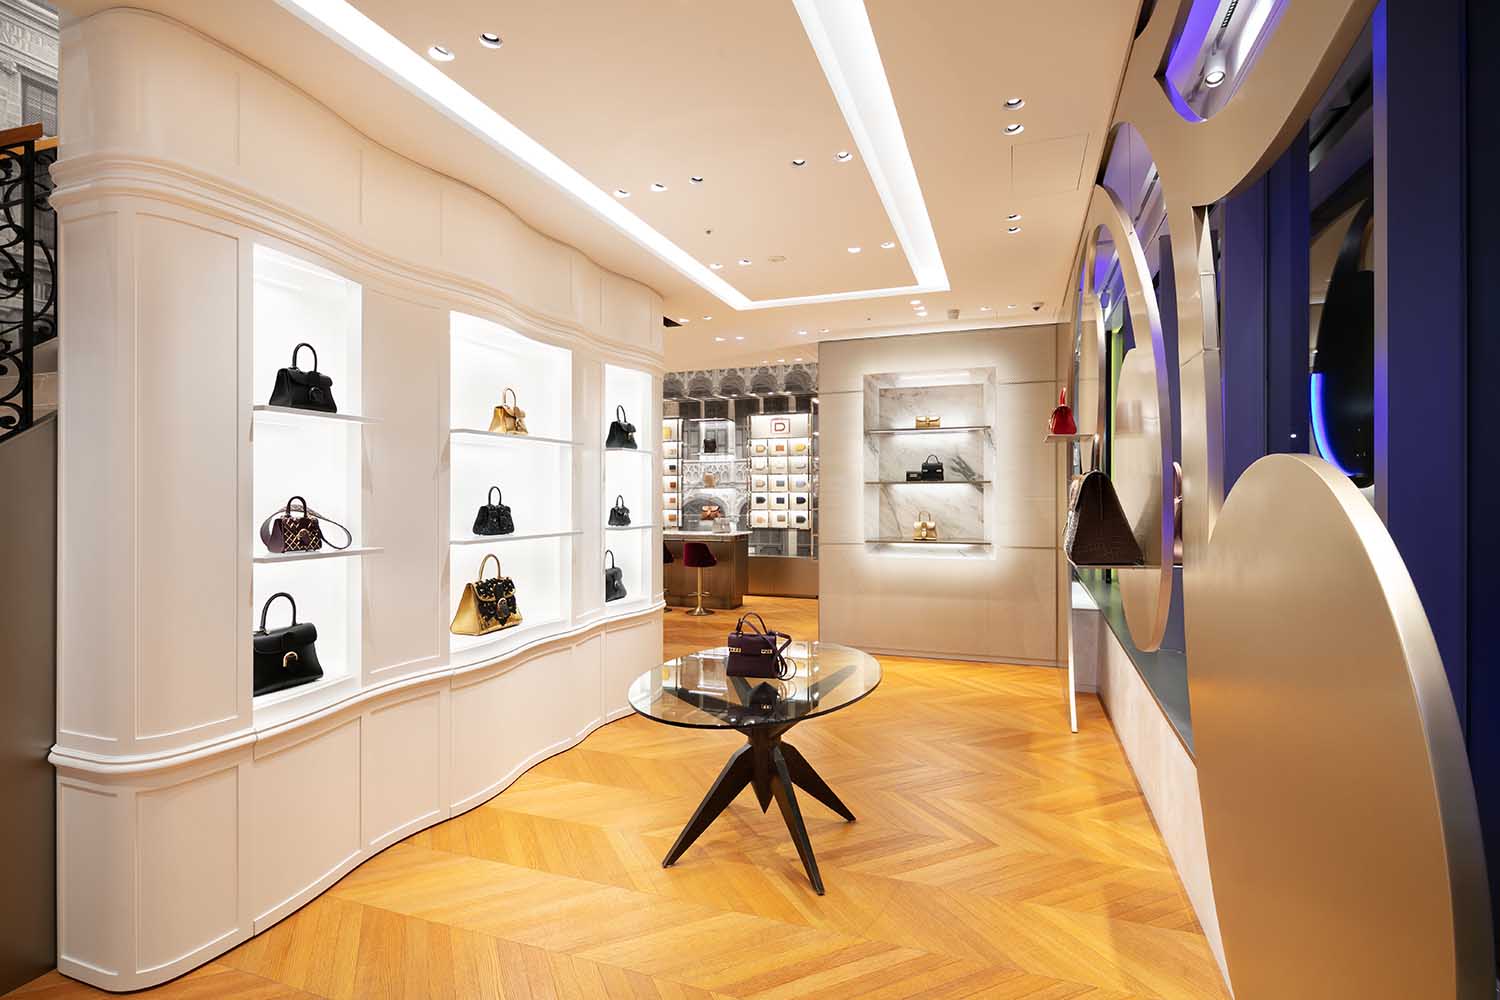 Delvaux opens new London store